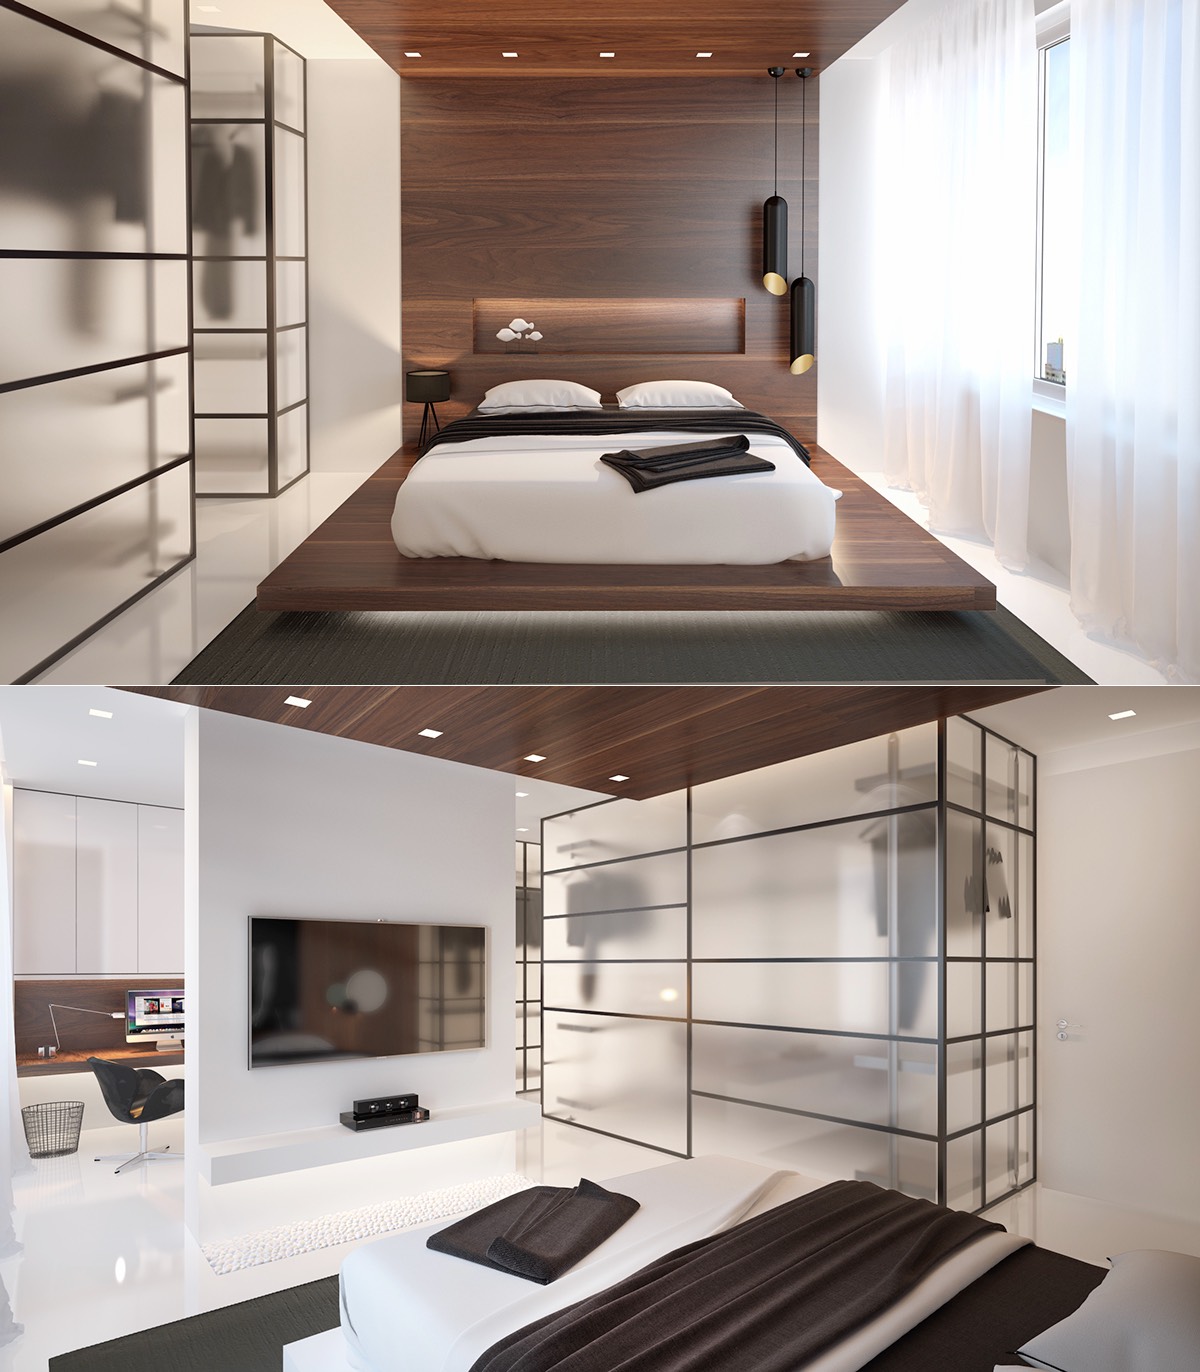 20 Beautiful Examples Of Bedrooms With Attached Wardrobes,Office Building Design Architecture